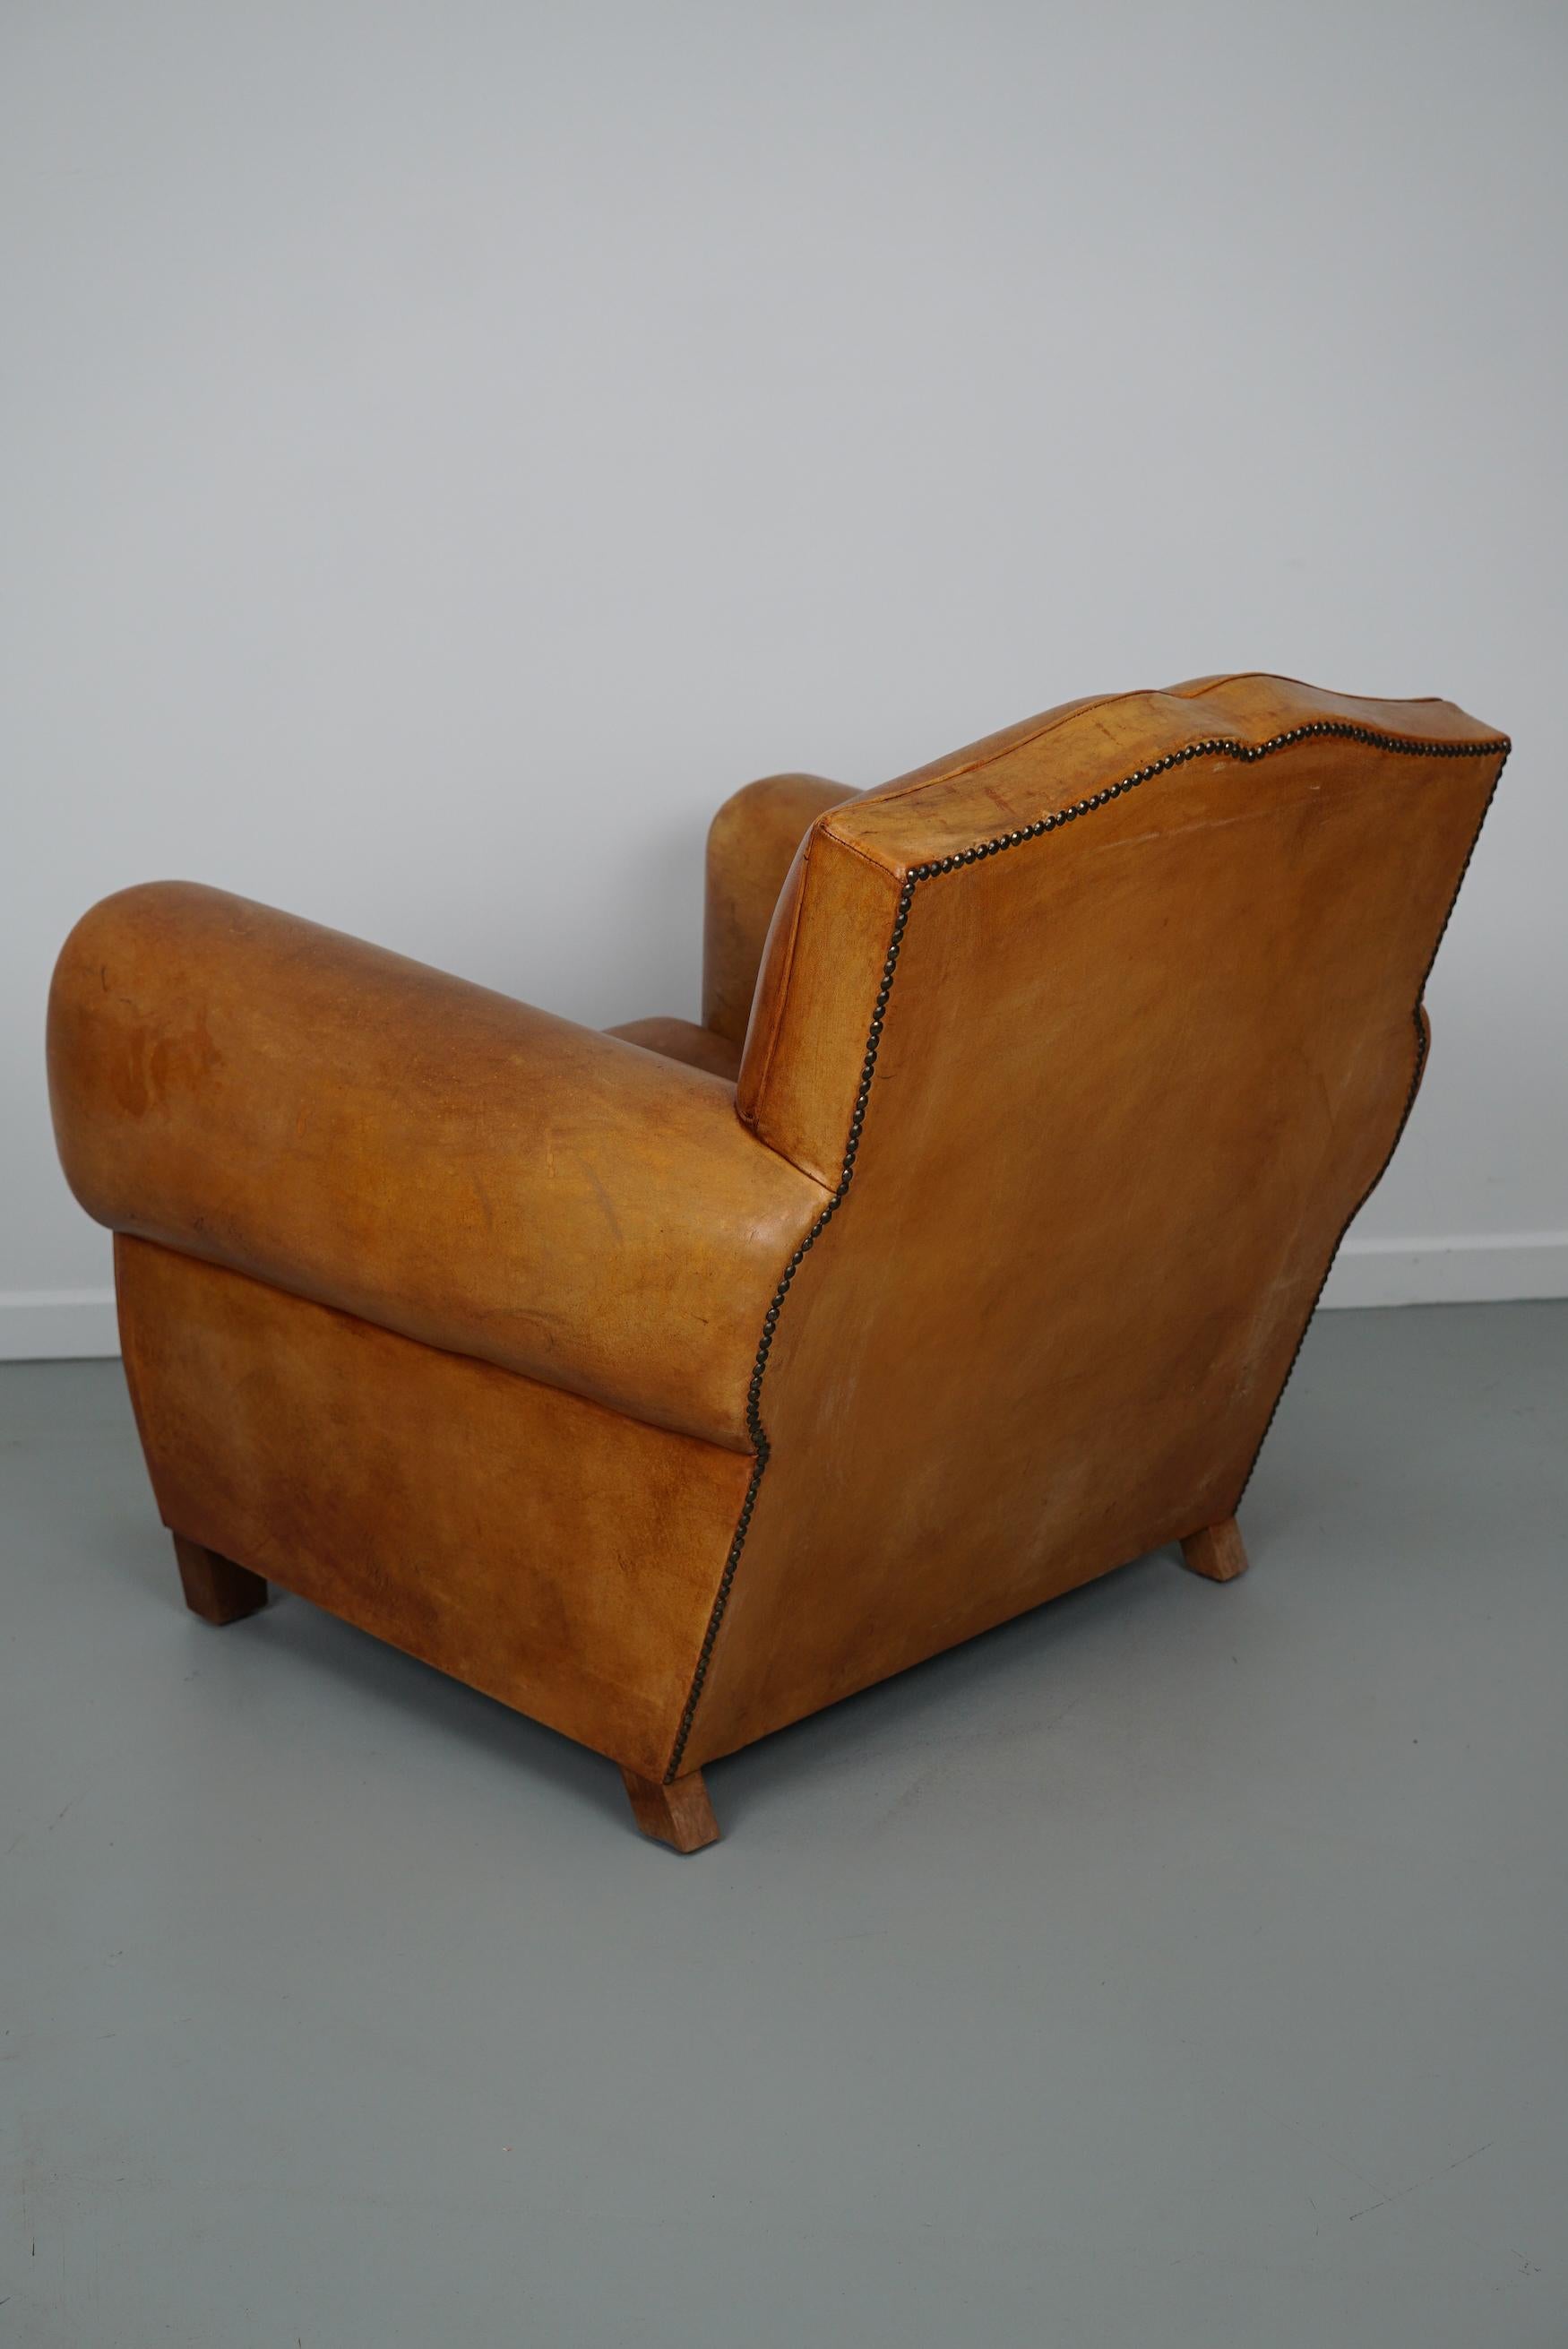 Late 20th Century Vintage French Moustache Back Cognac-Colored Leather Club Chair